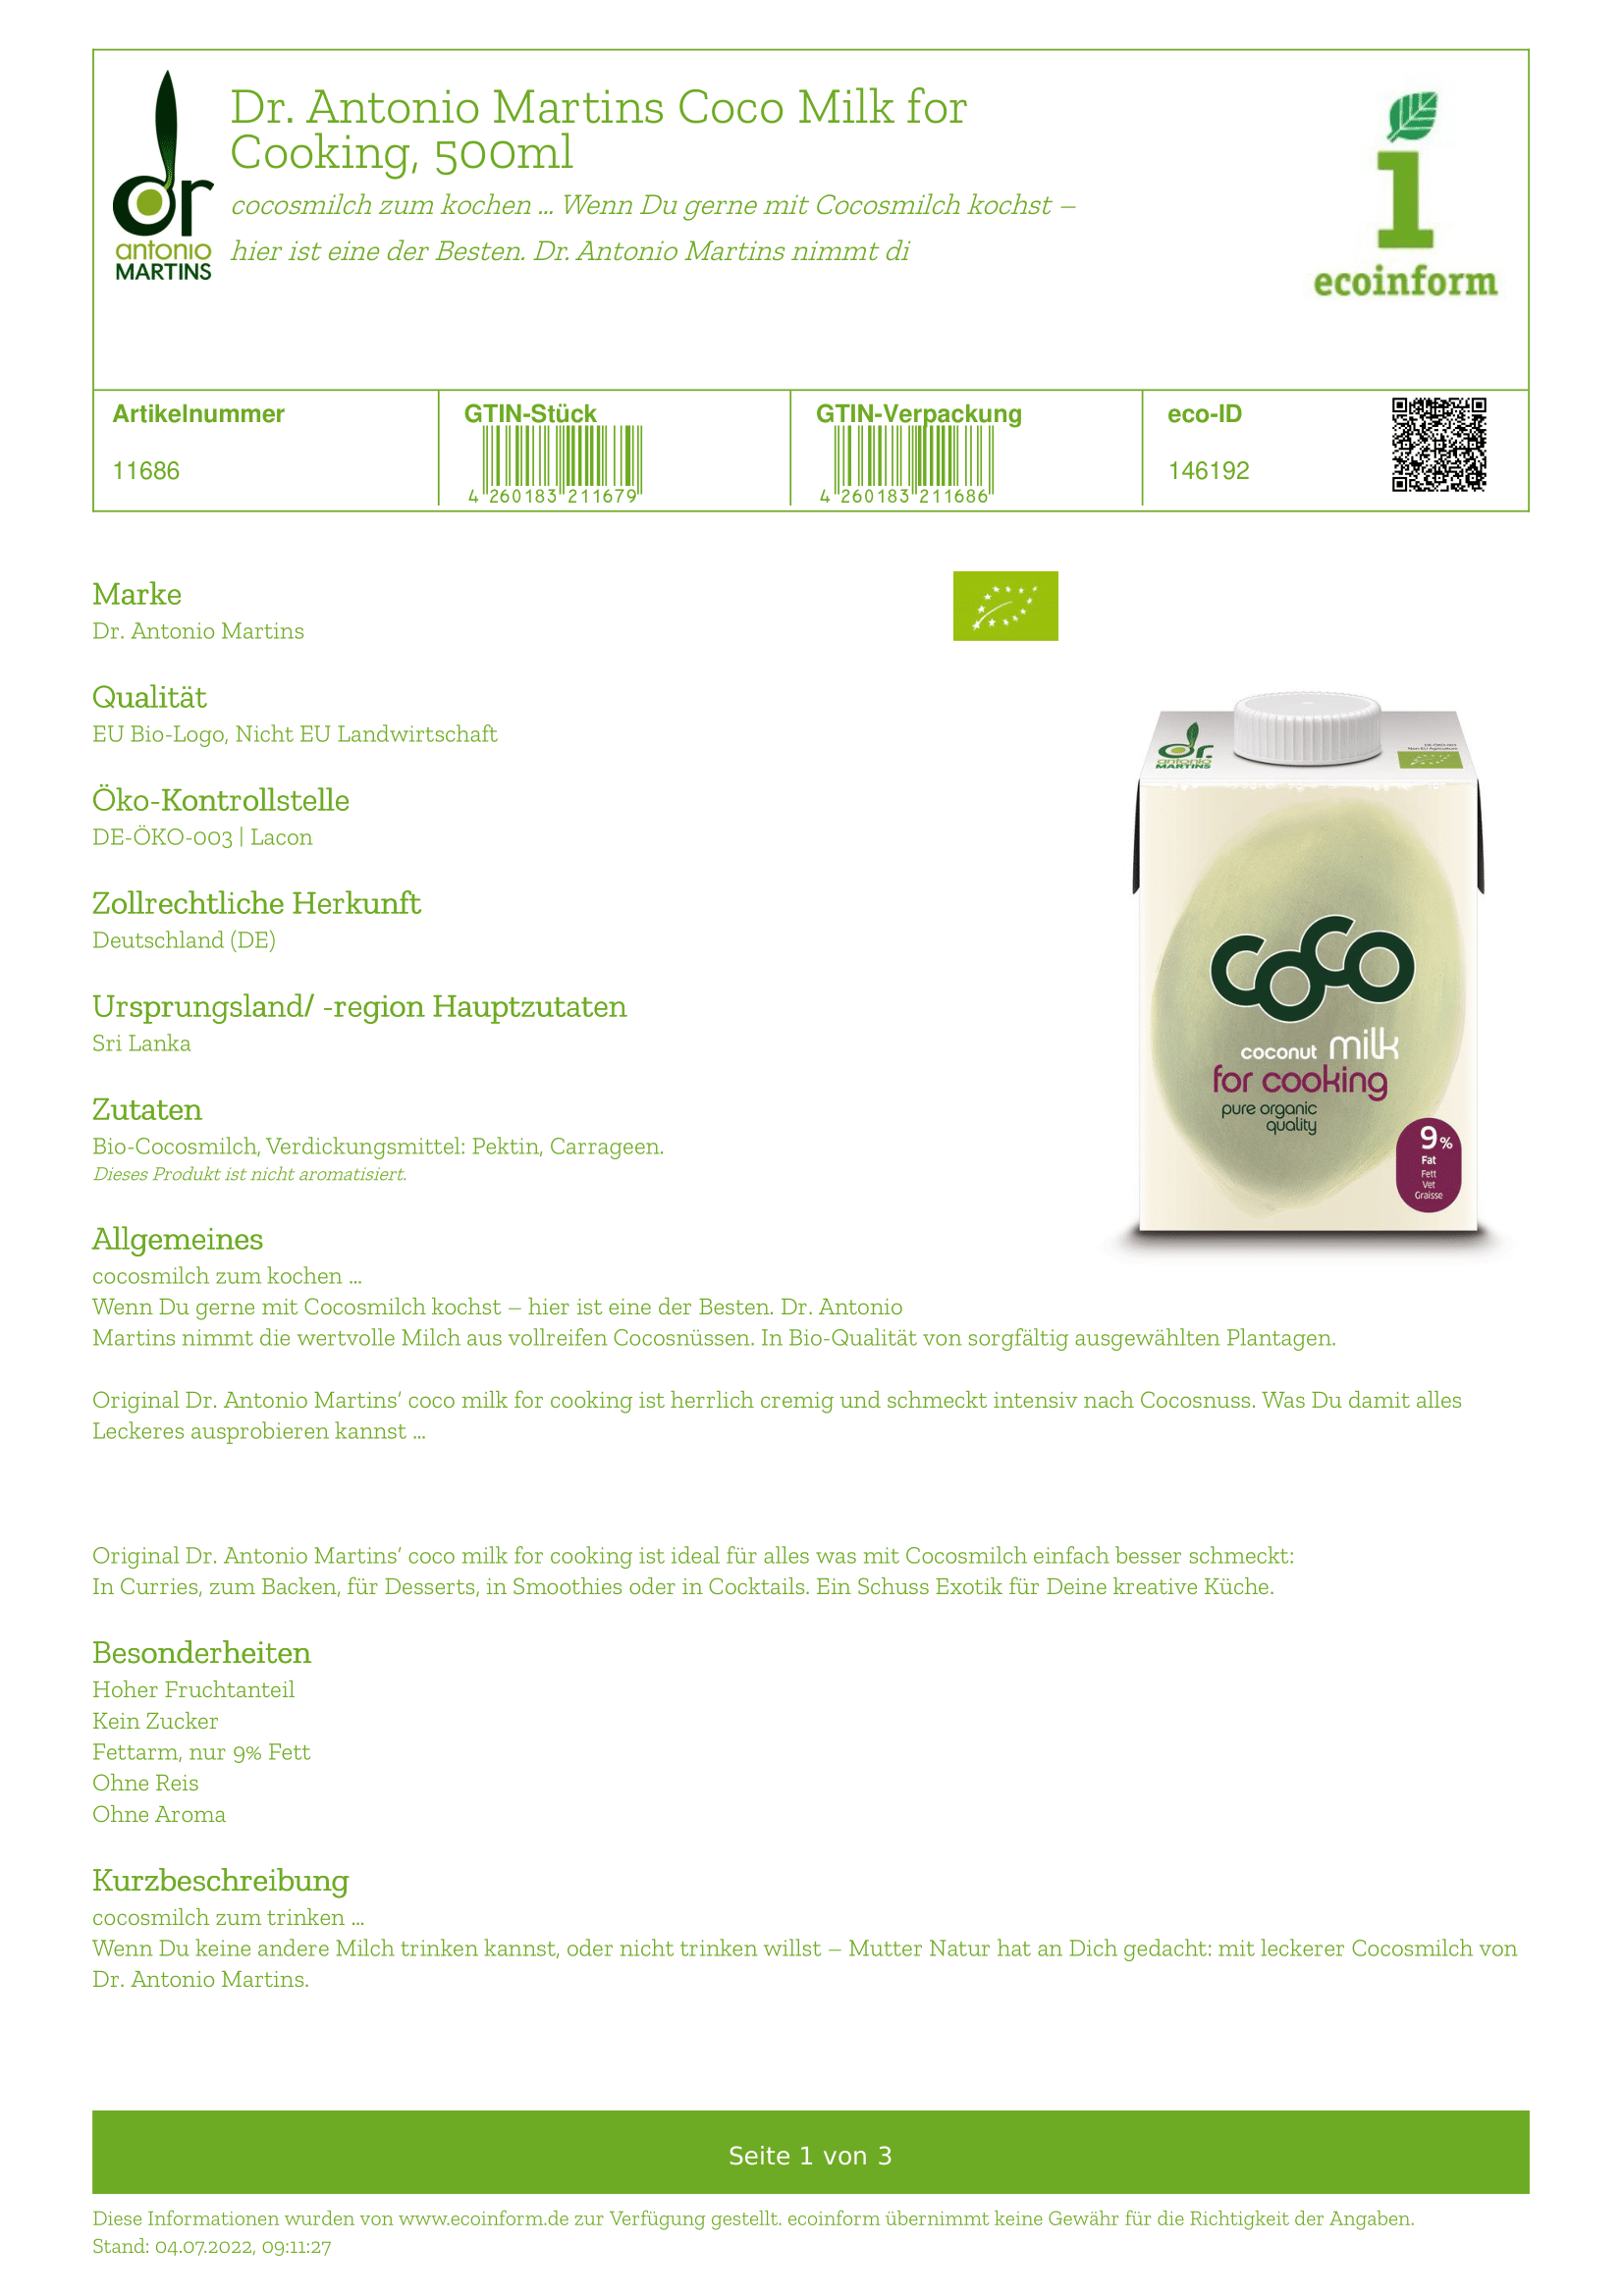 Coco Milk for Cooking